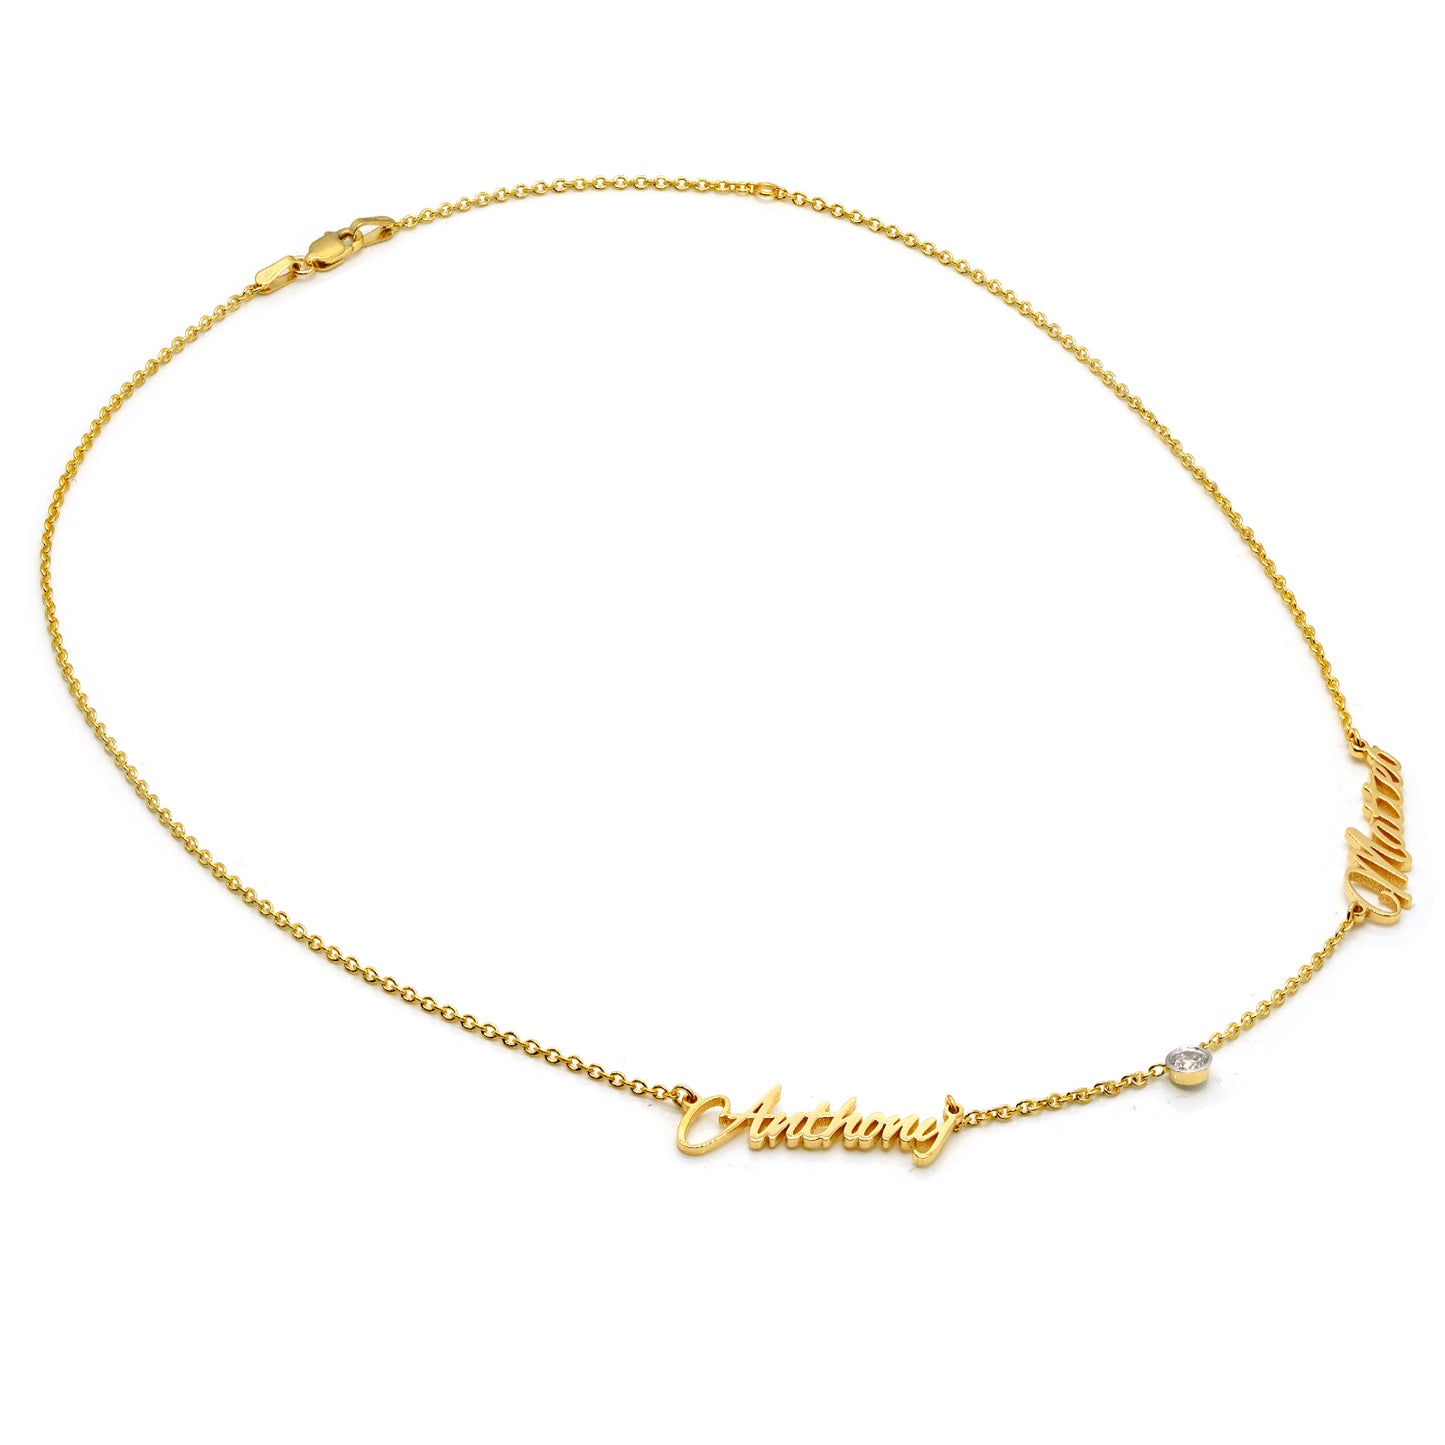 Script Name Necklace with Bezel Set Diamonds in 14K Gold